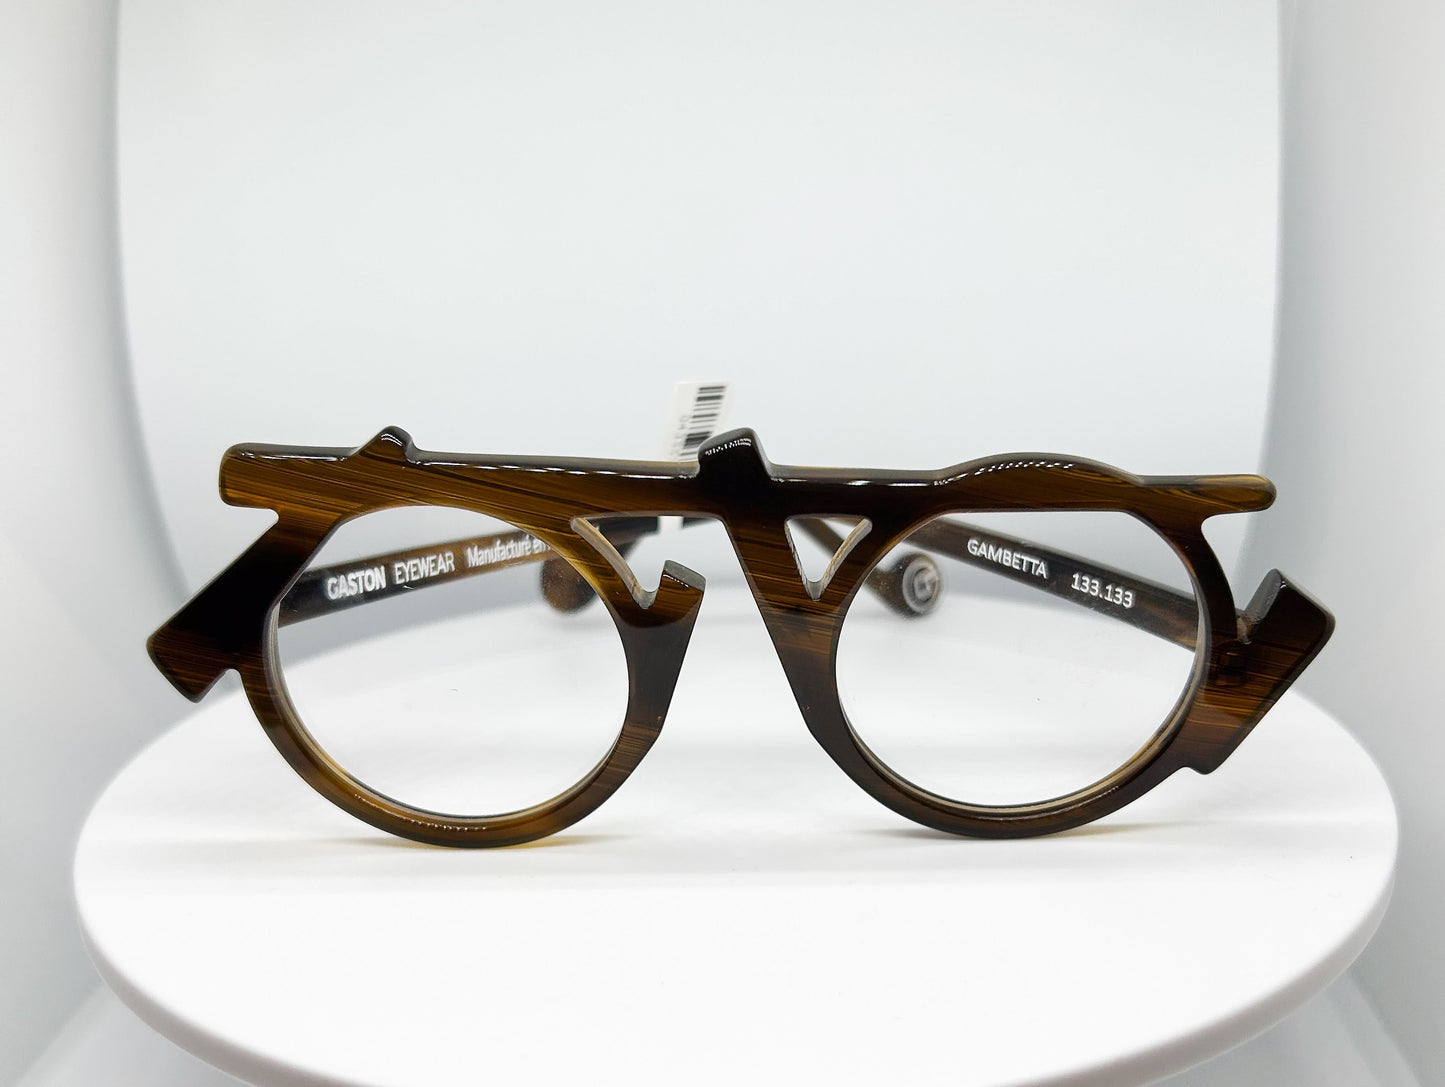 Buy Gaston Eyewear - Gambetta, a  Brown; Acetate Optical  Frame with a Round shape. An Authorized Dealer, Adair Eyewear has a 40+ Years History of Customer Service Excellence